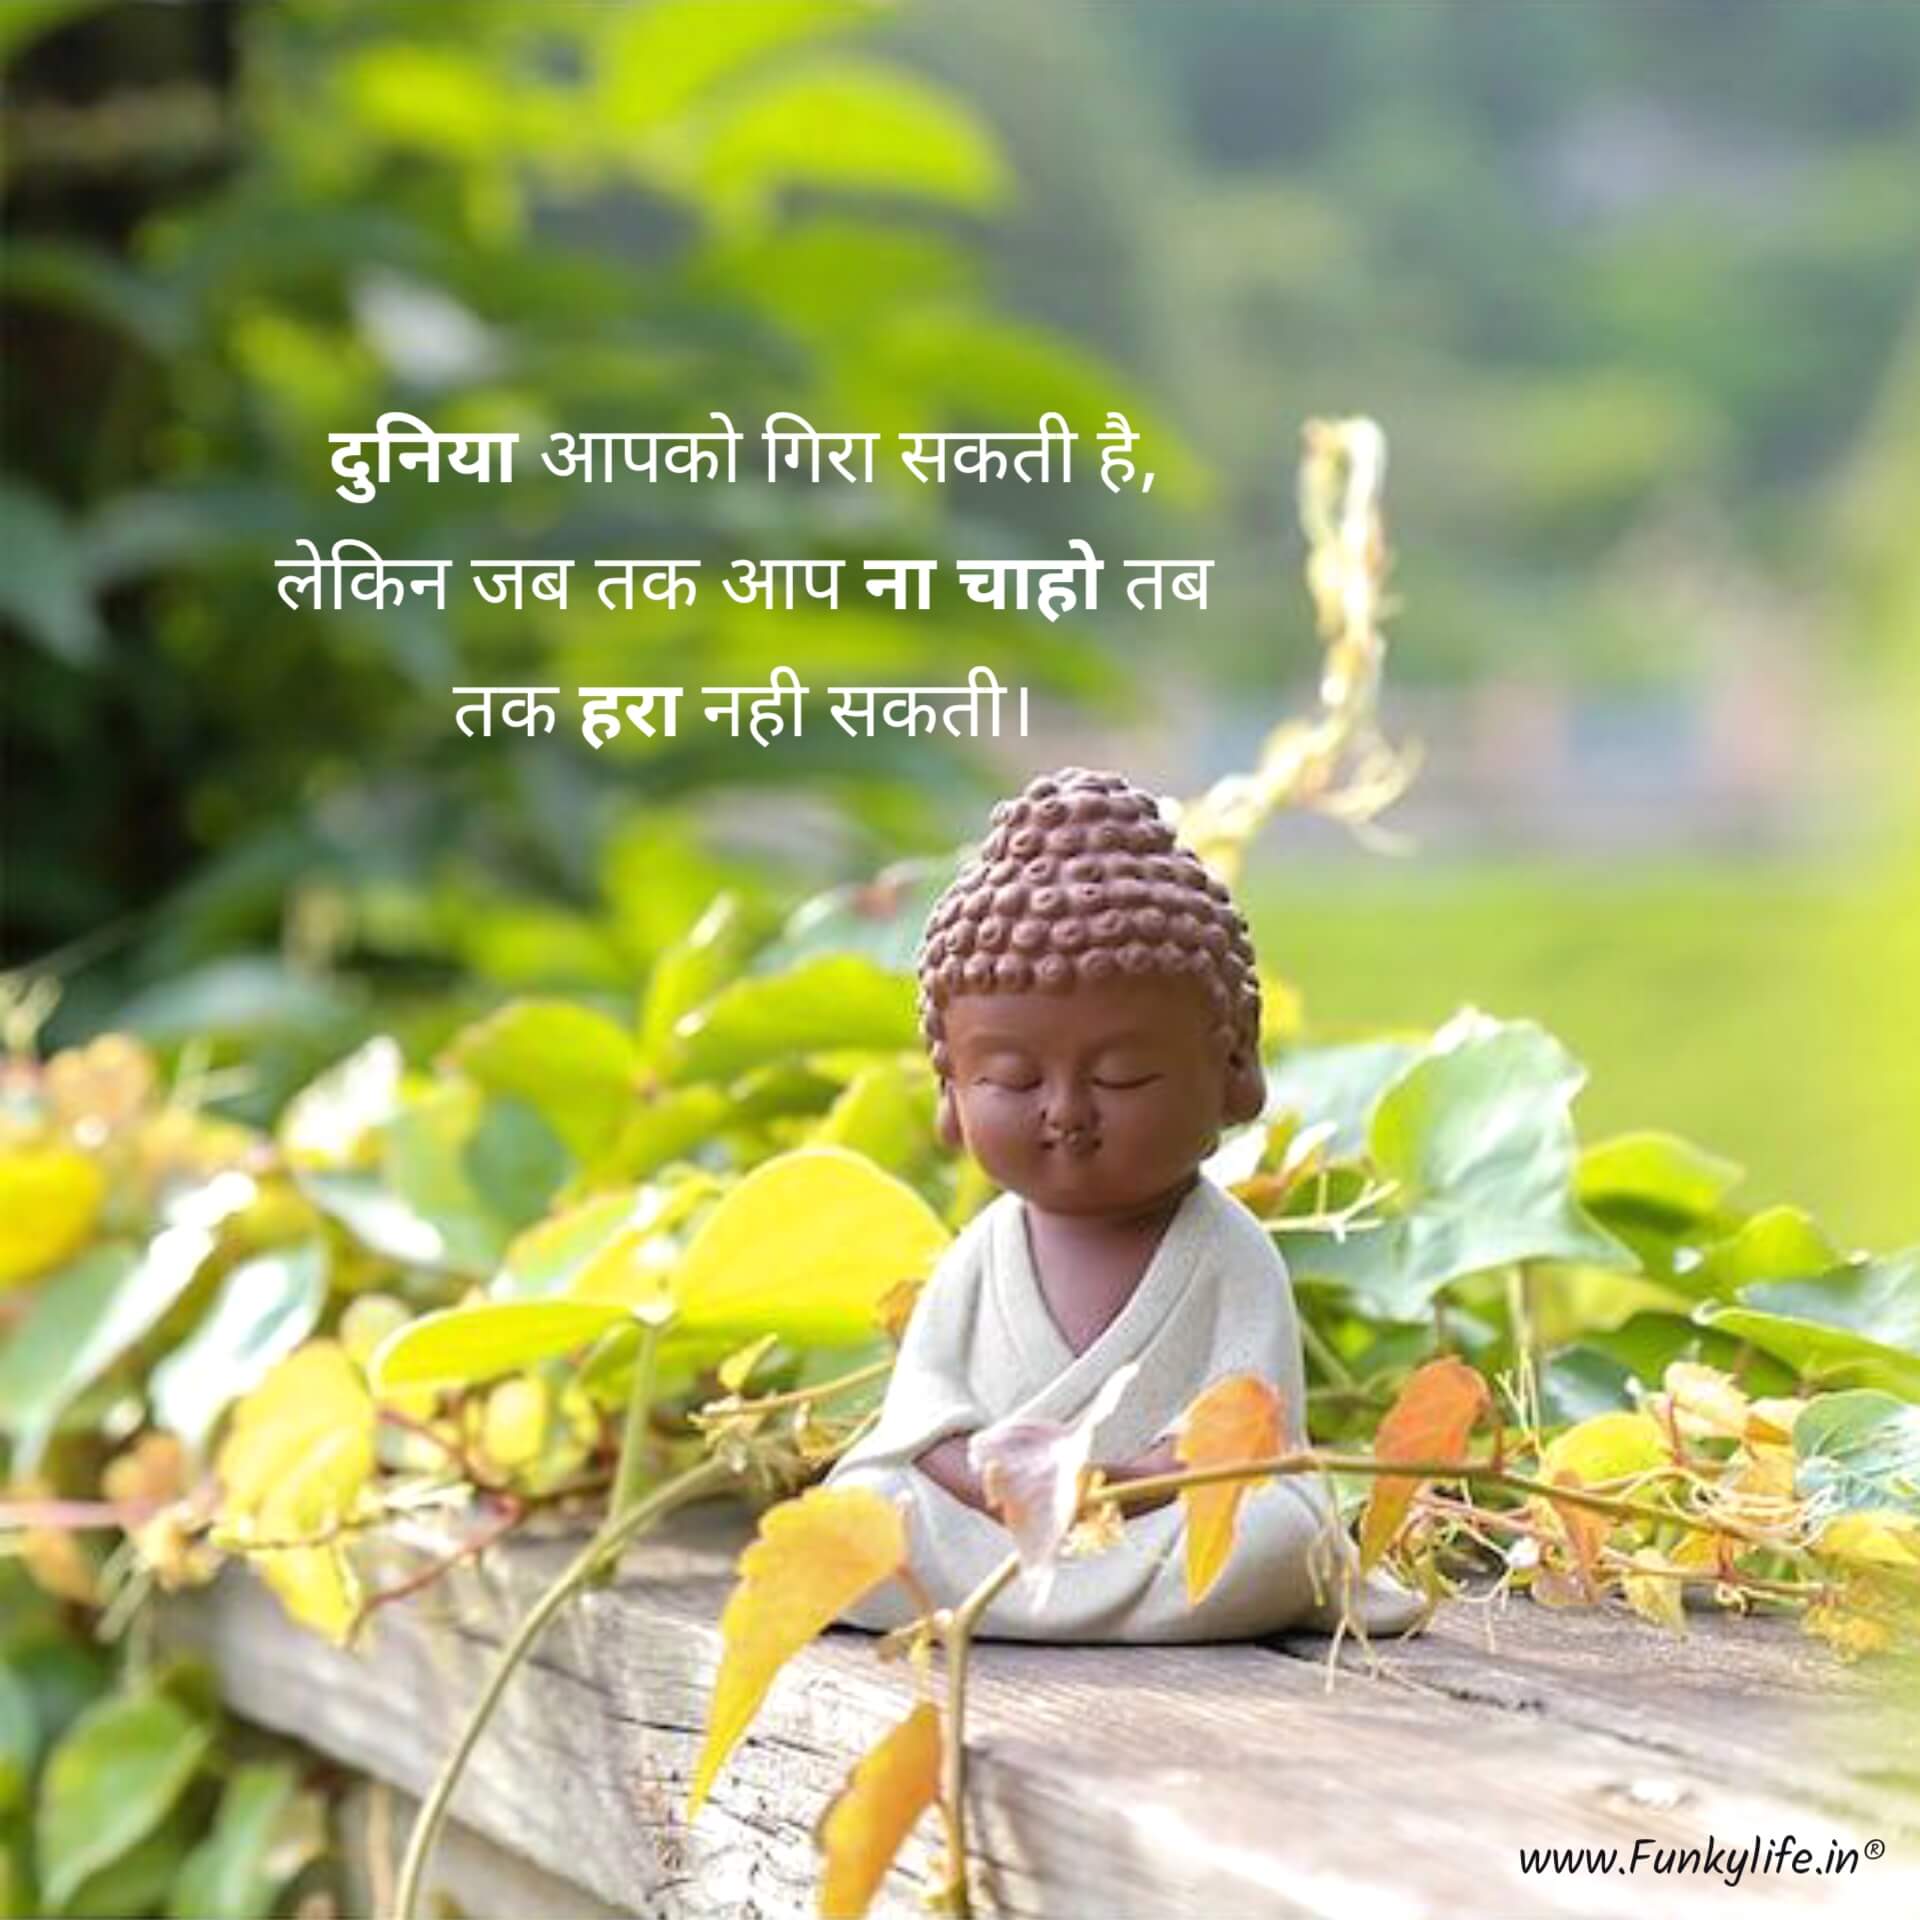 Positive Life Quotes in Hindi